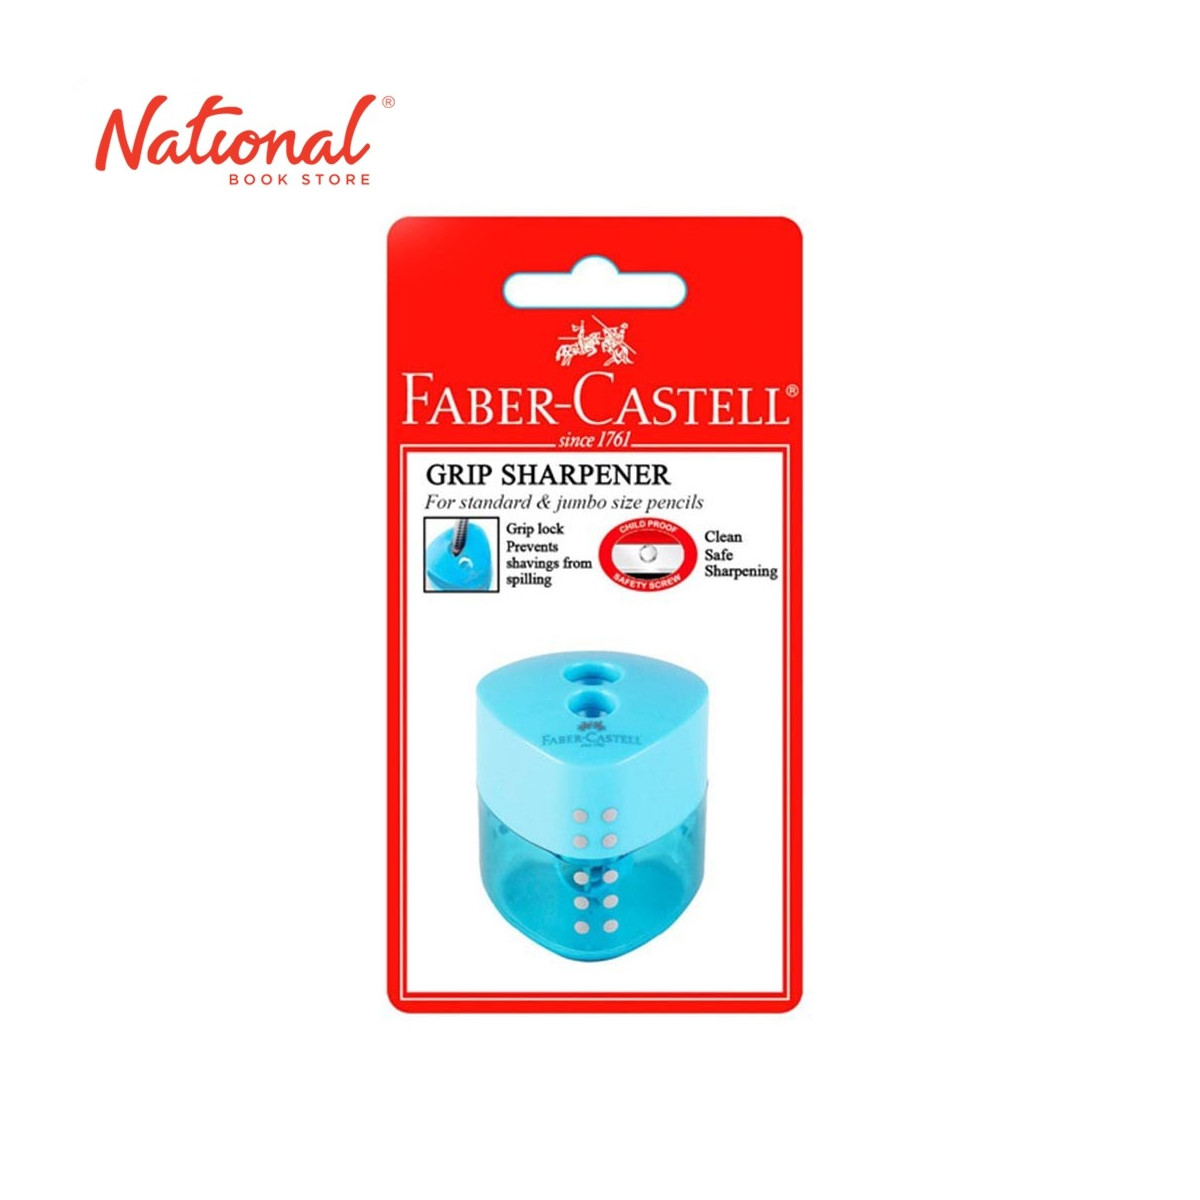 FABER CASTELL TWO-HOLE SHARPENER 183197 GRIP AUTO LOCK